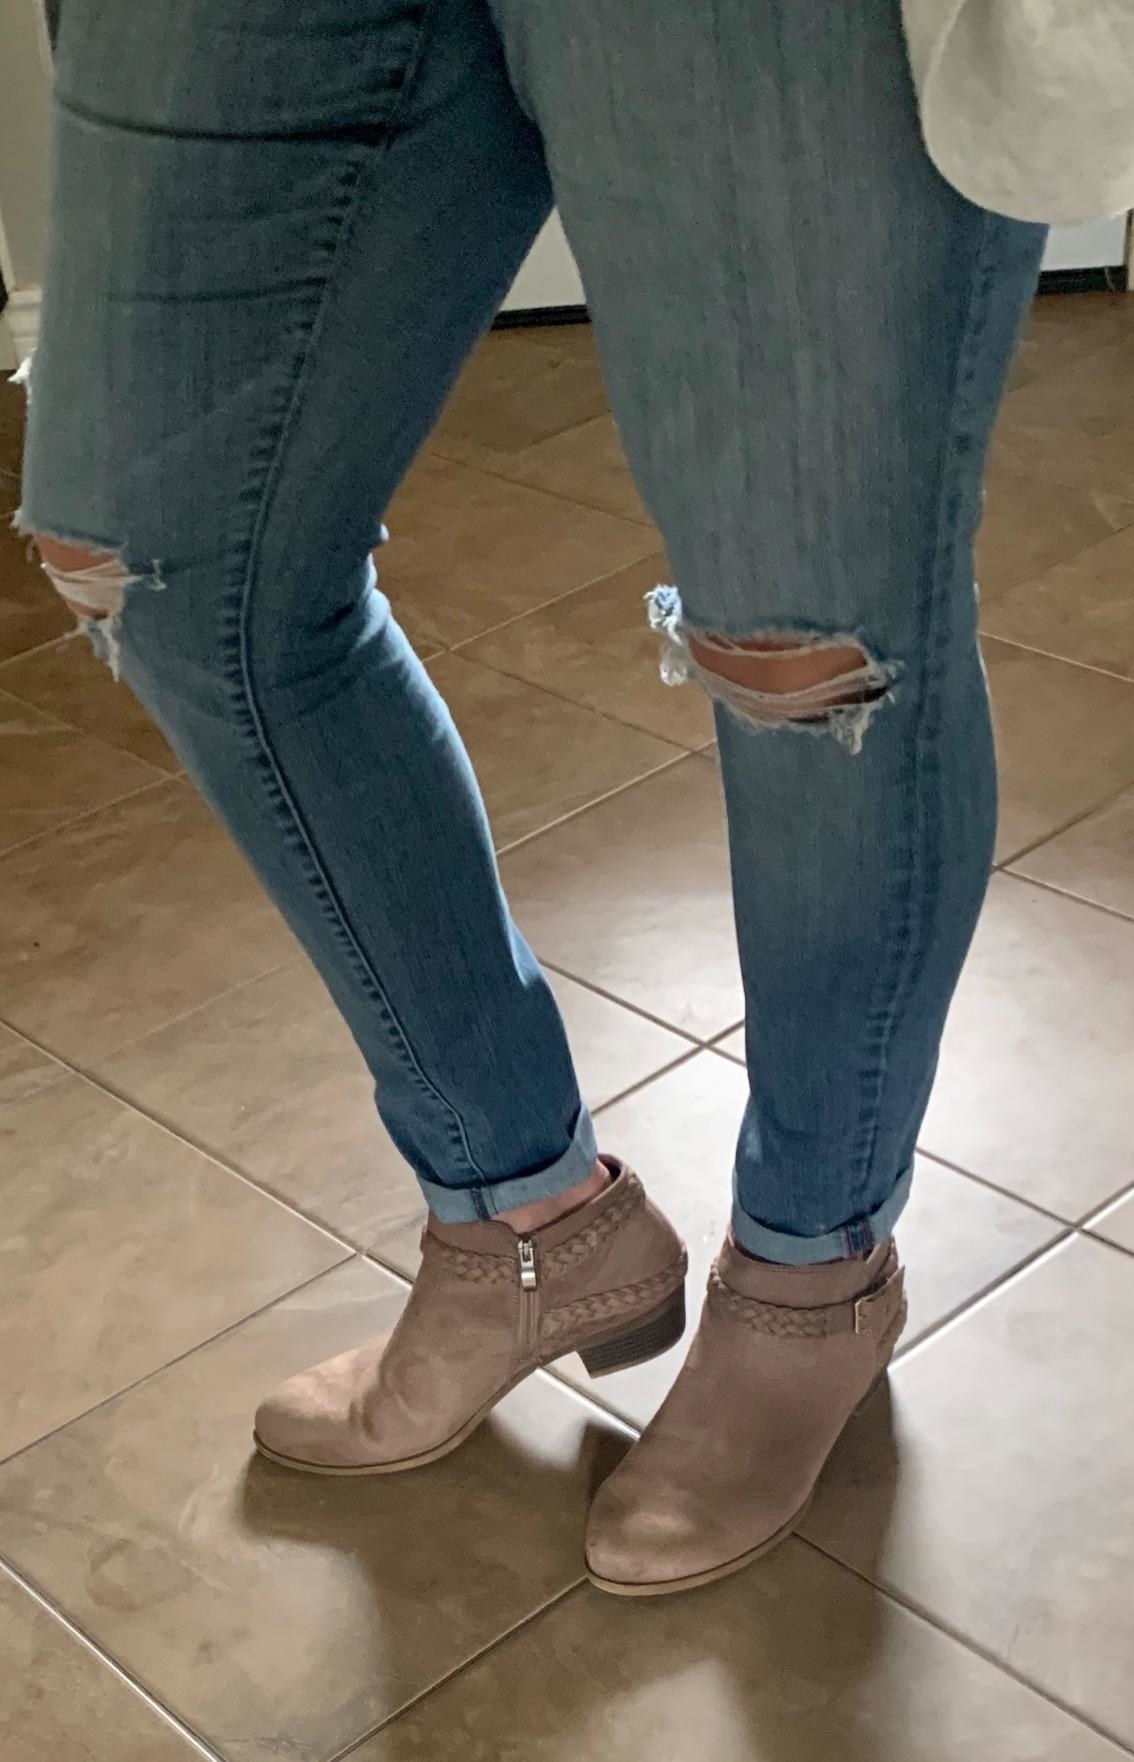 Reviewer in the light tan booties with jeans